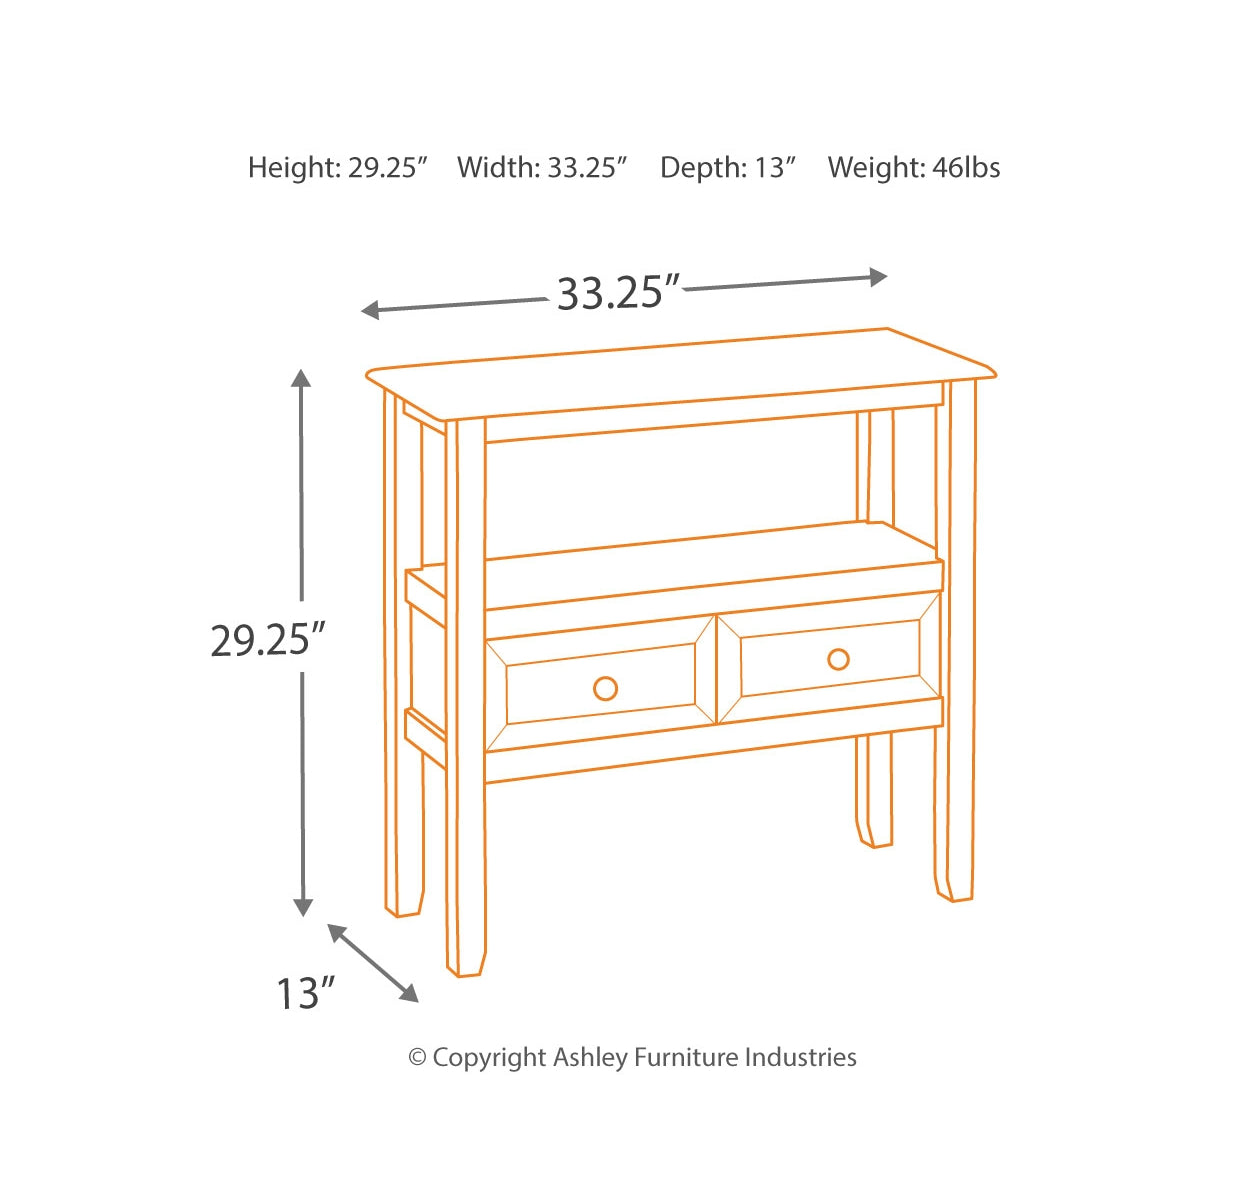 Abbonto Accent Table